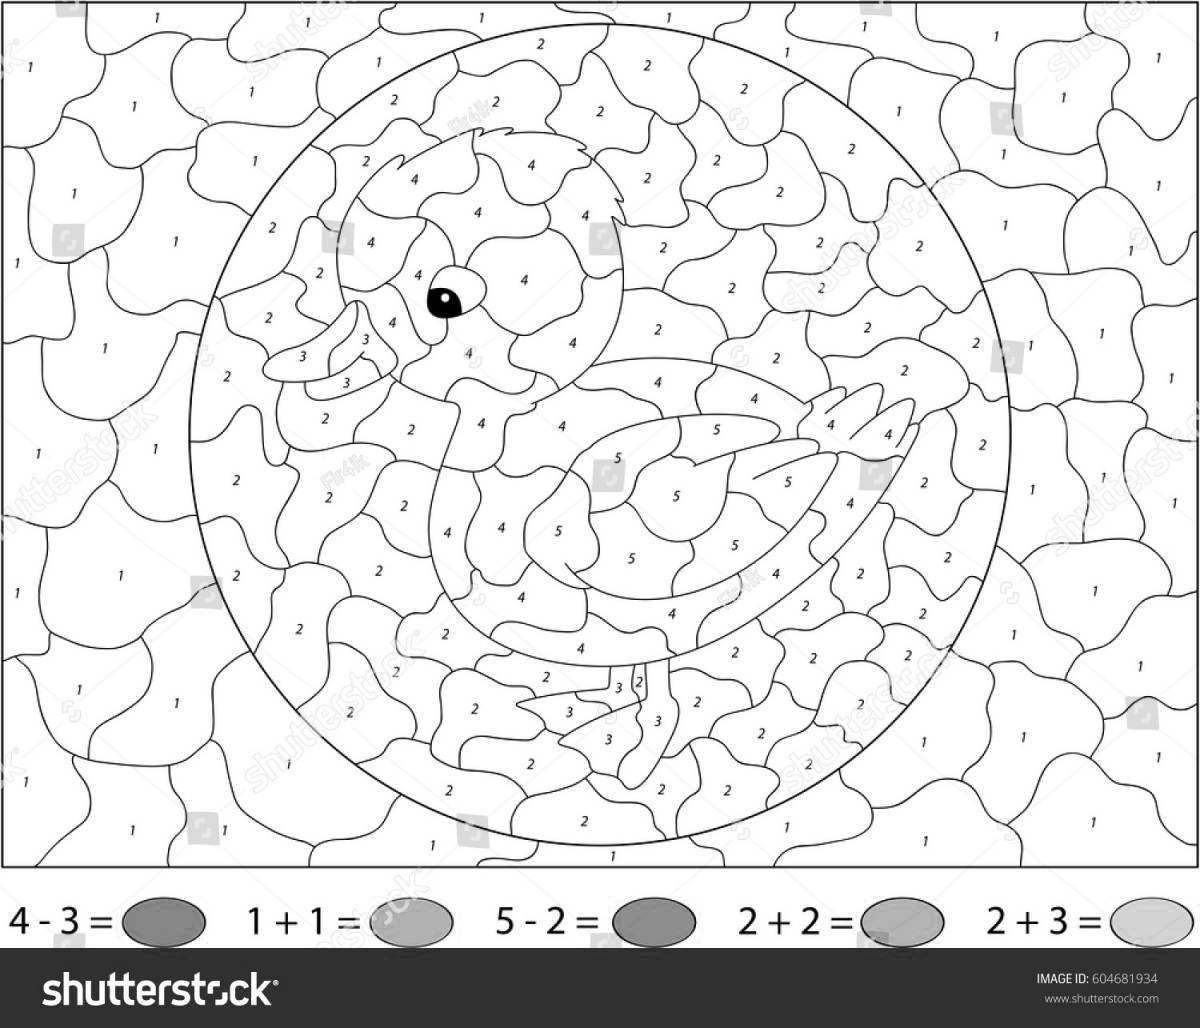 A wonderful strawberry number coloring game